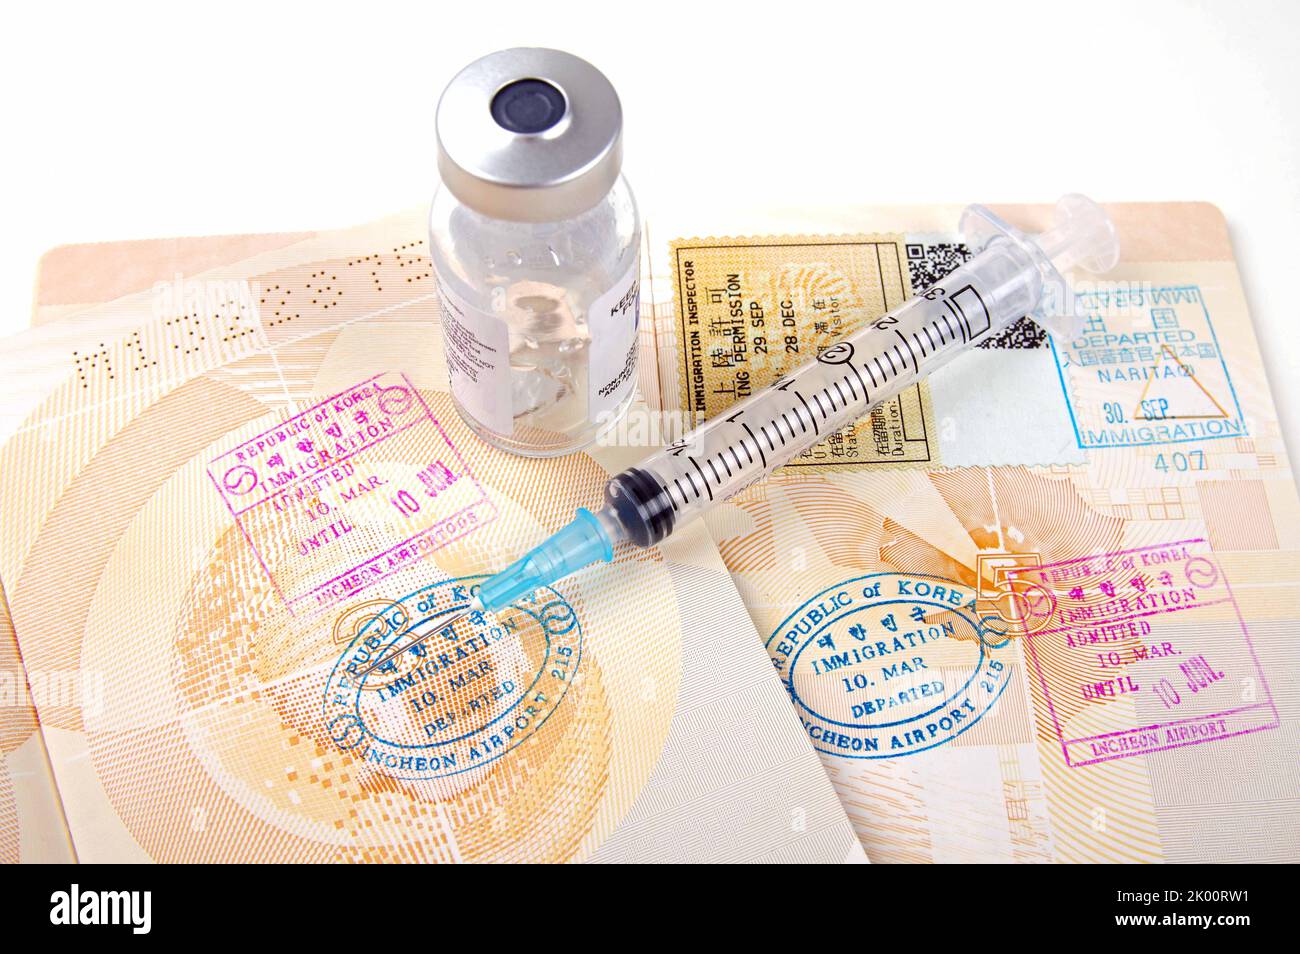 stamped passport pages and vaccination syringe  with vial Stock Photo